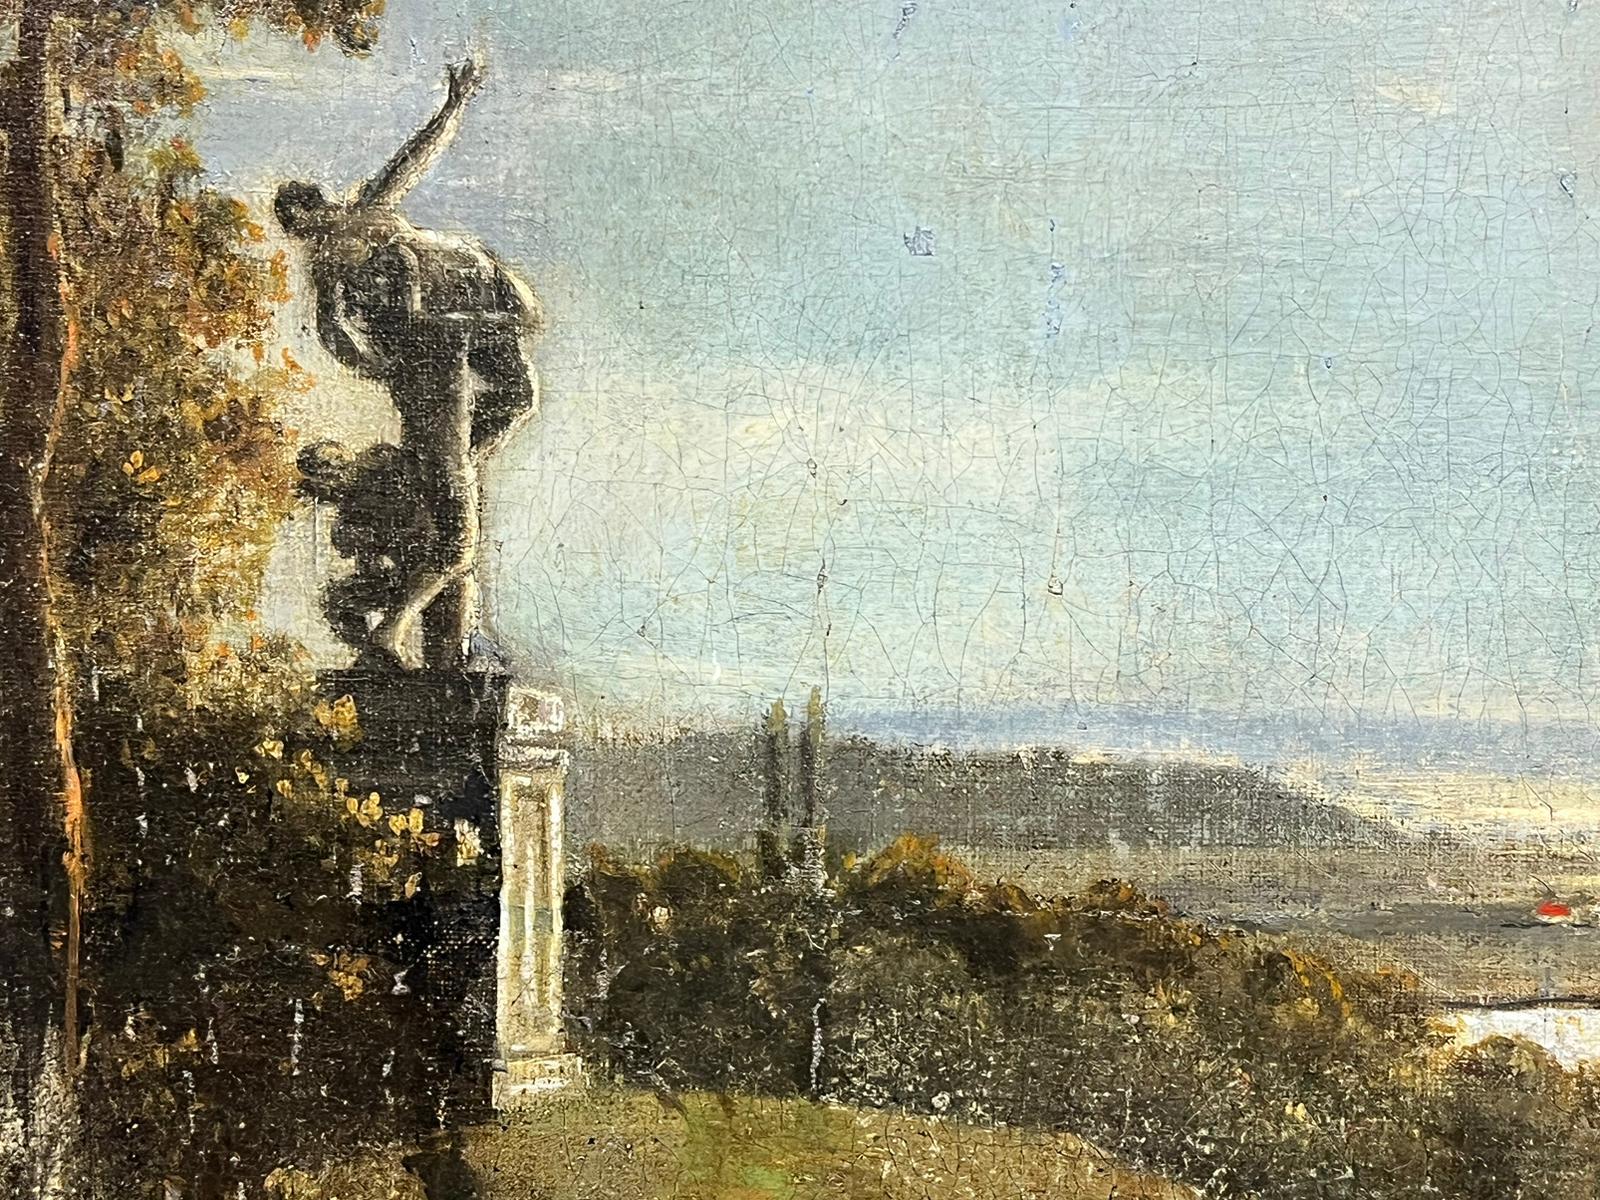 Italianate landscape garden with classical ornament, including Giambologna's Sabine women and a classical urn, view to a bay beyond
Coplestone Warre Bampfylde (British 1720-1791)
oil on canvas, framed
framed: 30 x 35 inches
painting: 24 x 29.5